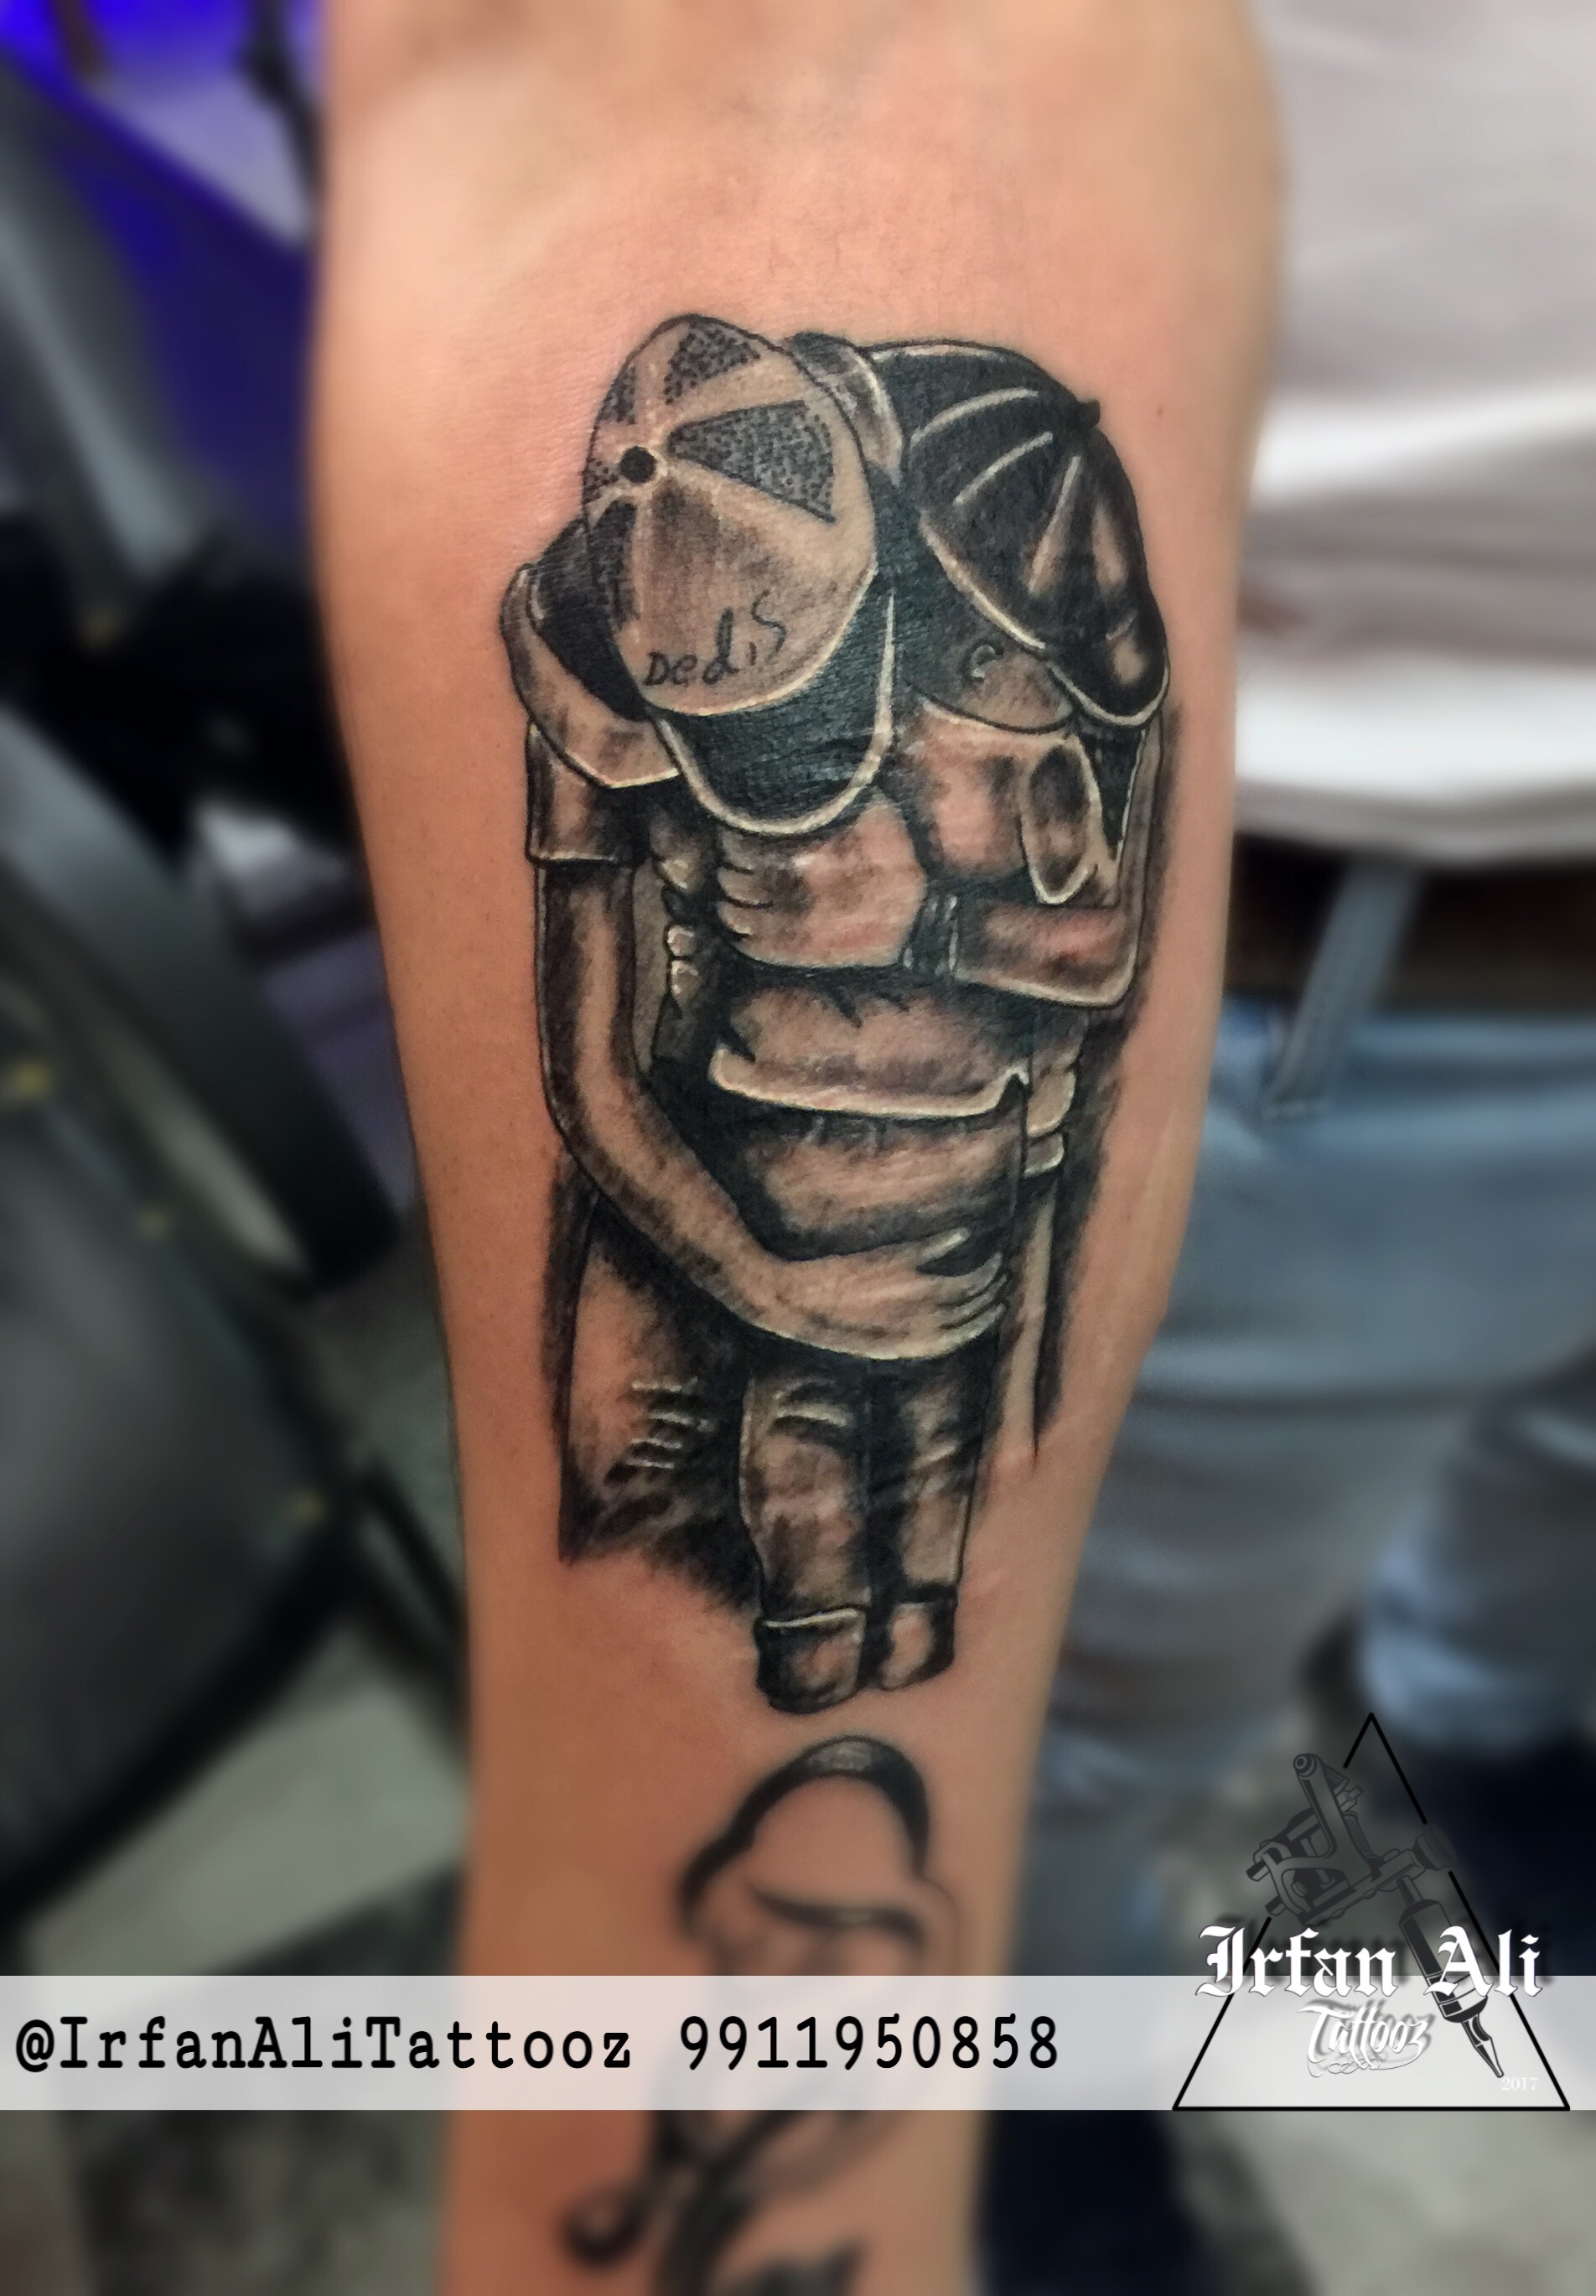 Tattoo uploaded by Aliens Tattoo  Checkout this amazing father  Son tattoo  by Tushar Marane at Aliens Tattoo India If you wish to get this tattoo  visit our website  wwwalienstattoocom 